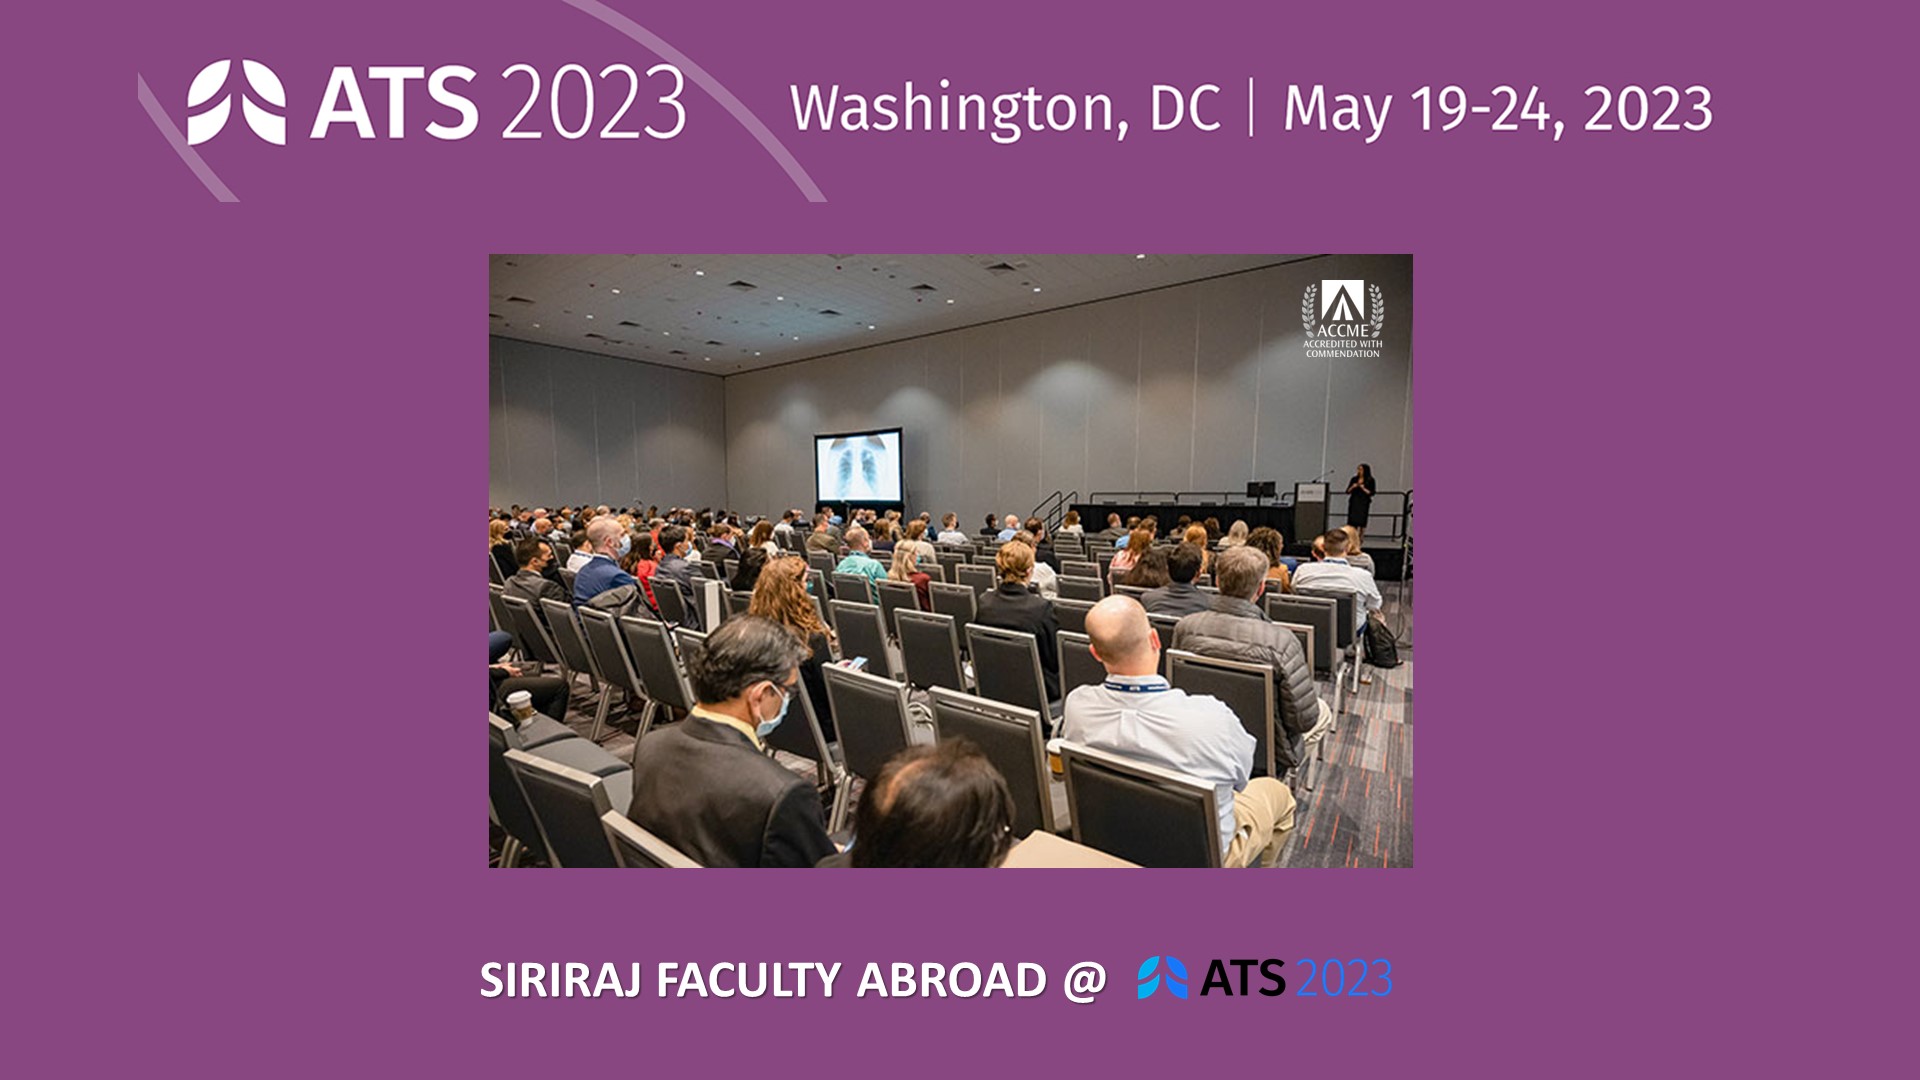 Siriraj Faculty Abroad at the American Thoracic Society Conference 2023